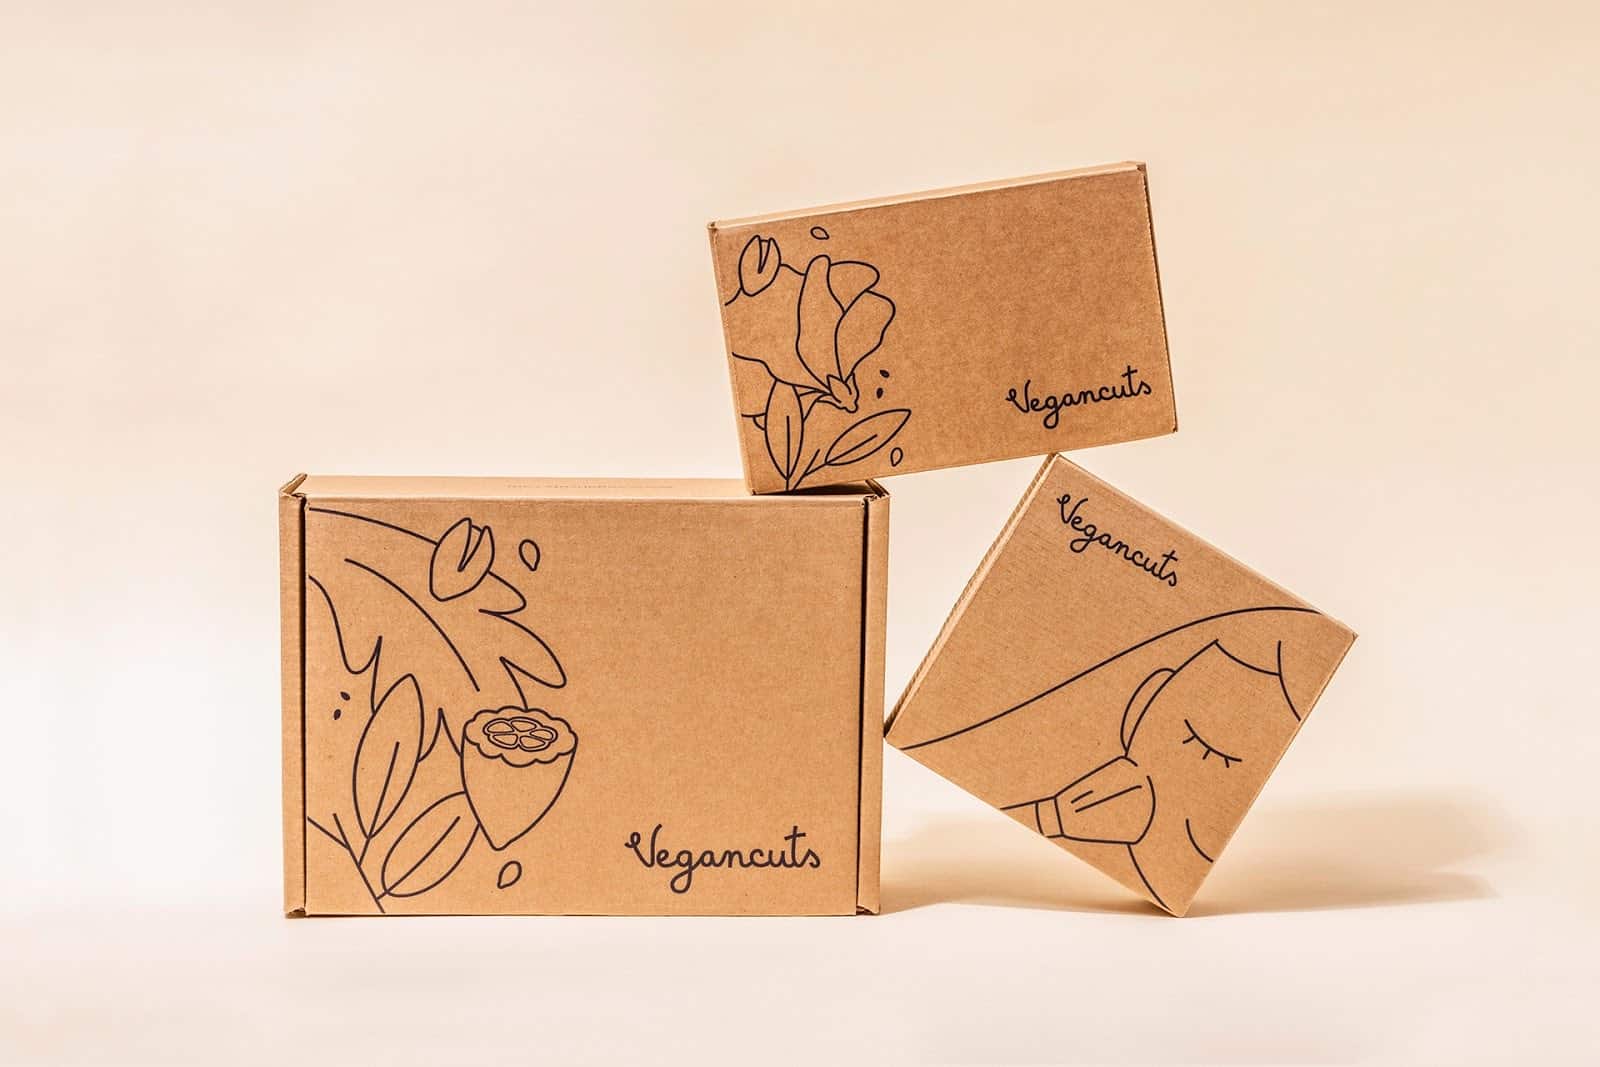 vegancuts beauty makeup snack customization boxes with logo